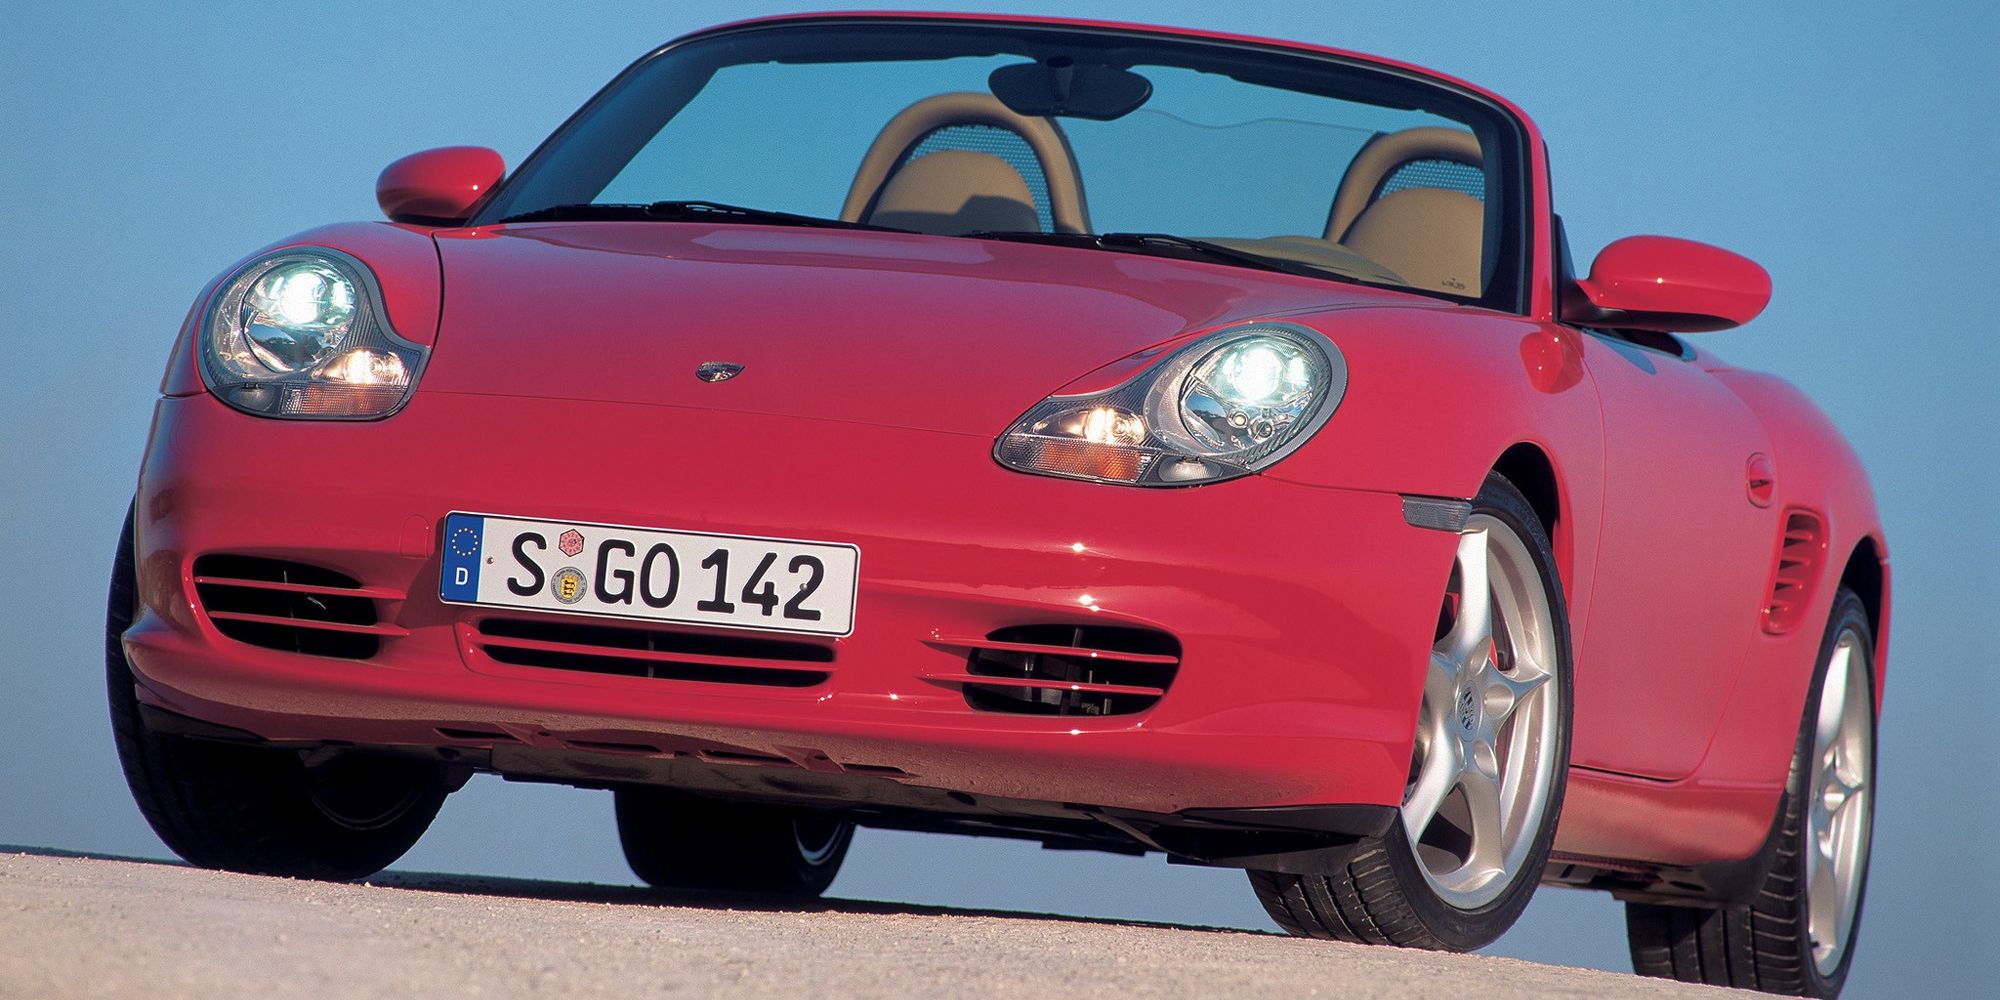 The front of a red 986 Boxster